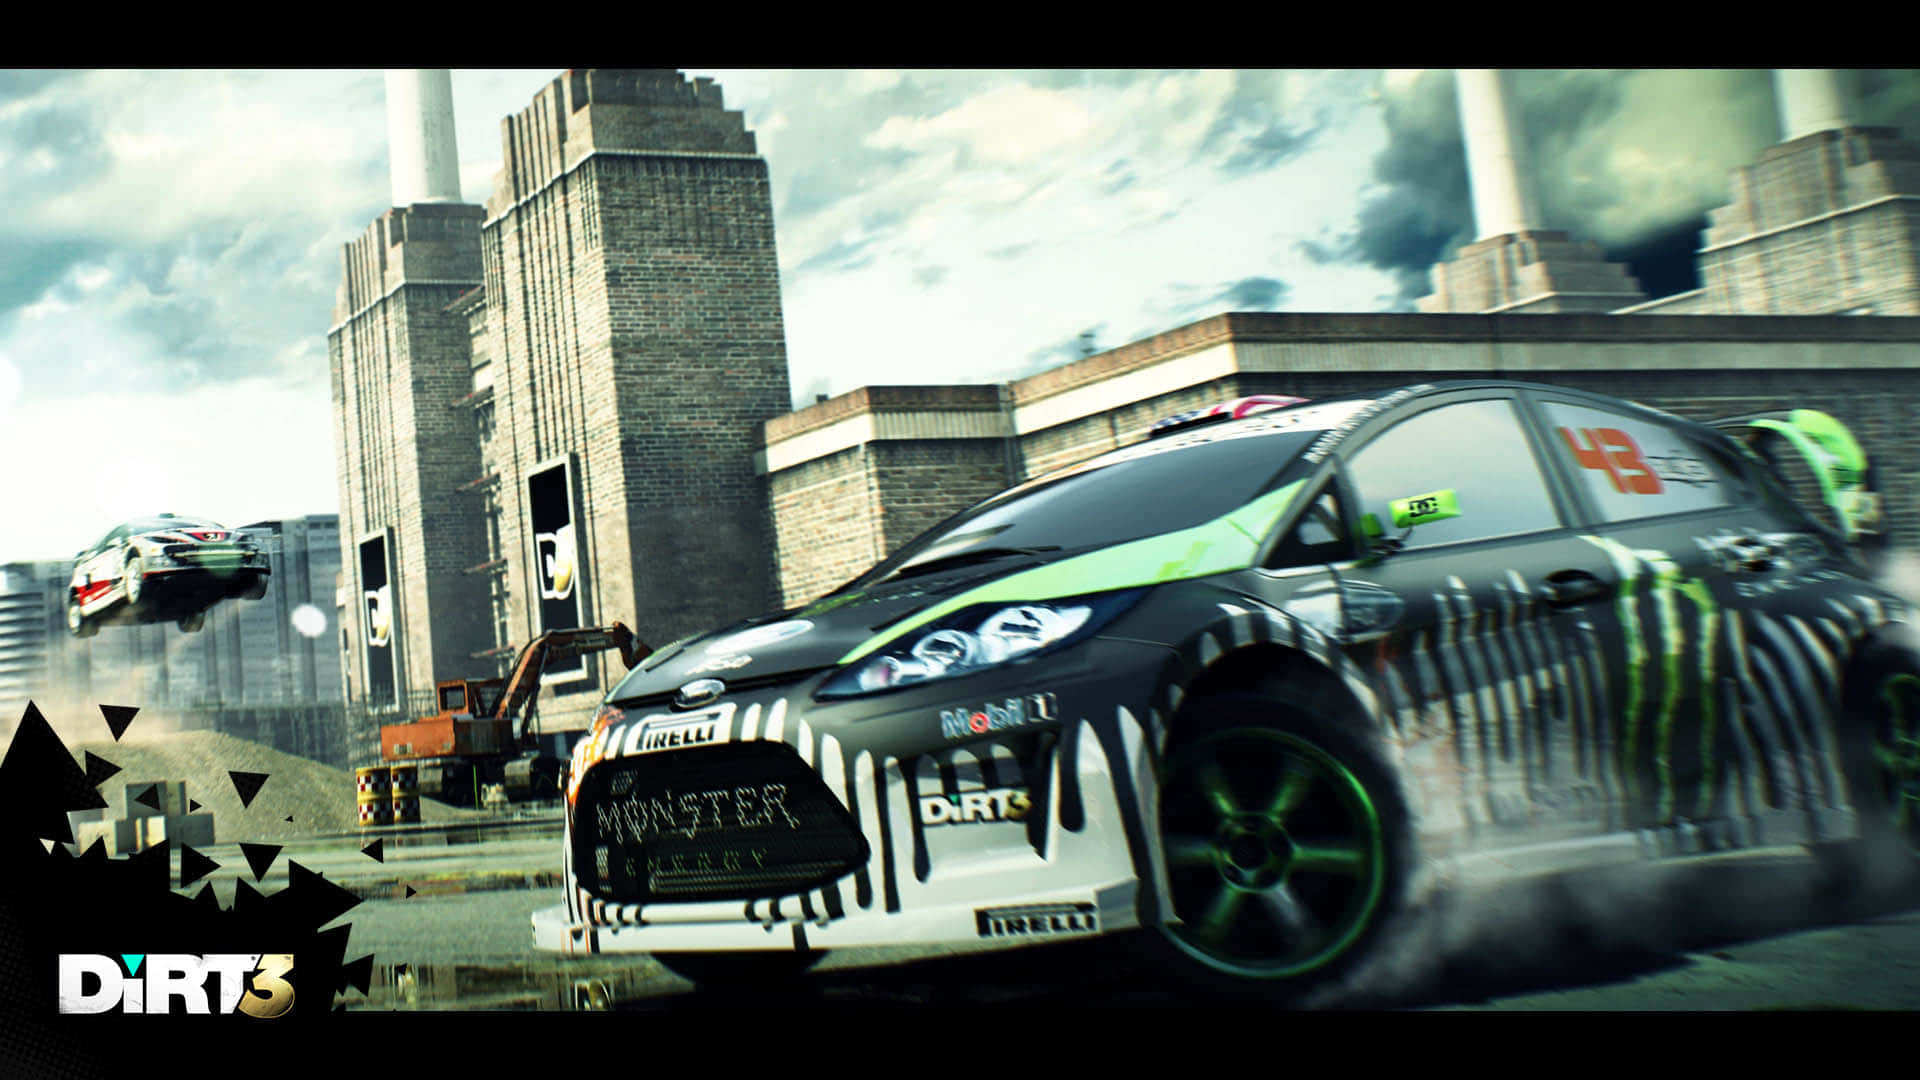 Feel the rush as you speed down rugged tracks in the adrenaline-pumping racing game, Dirt 3